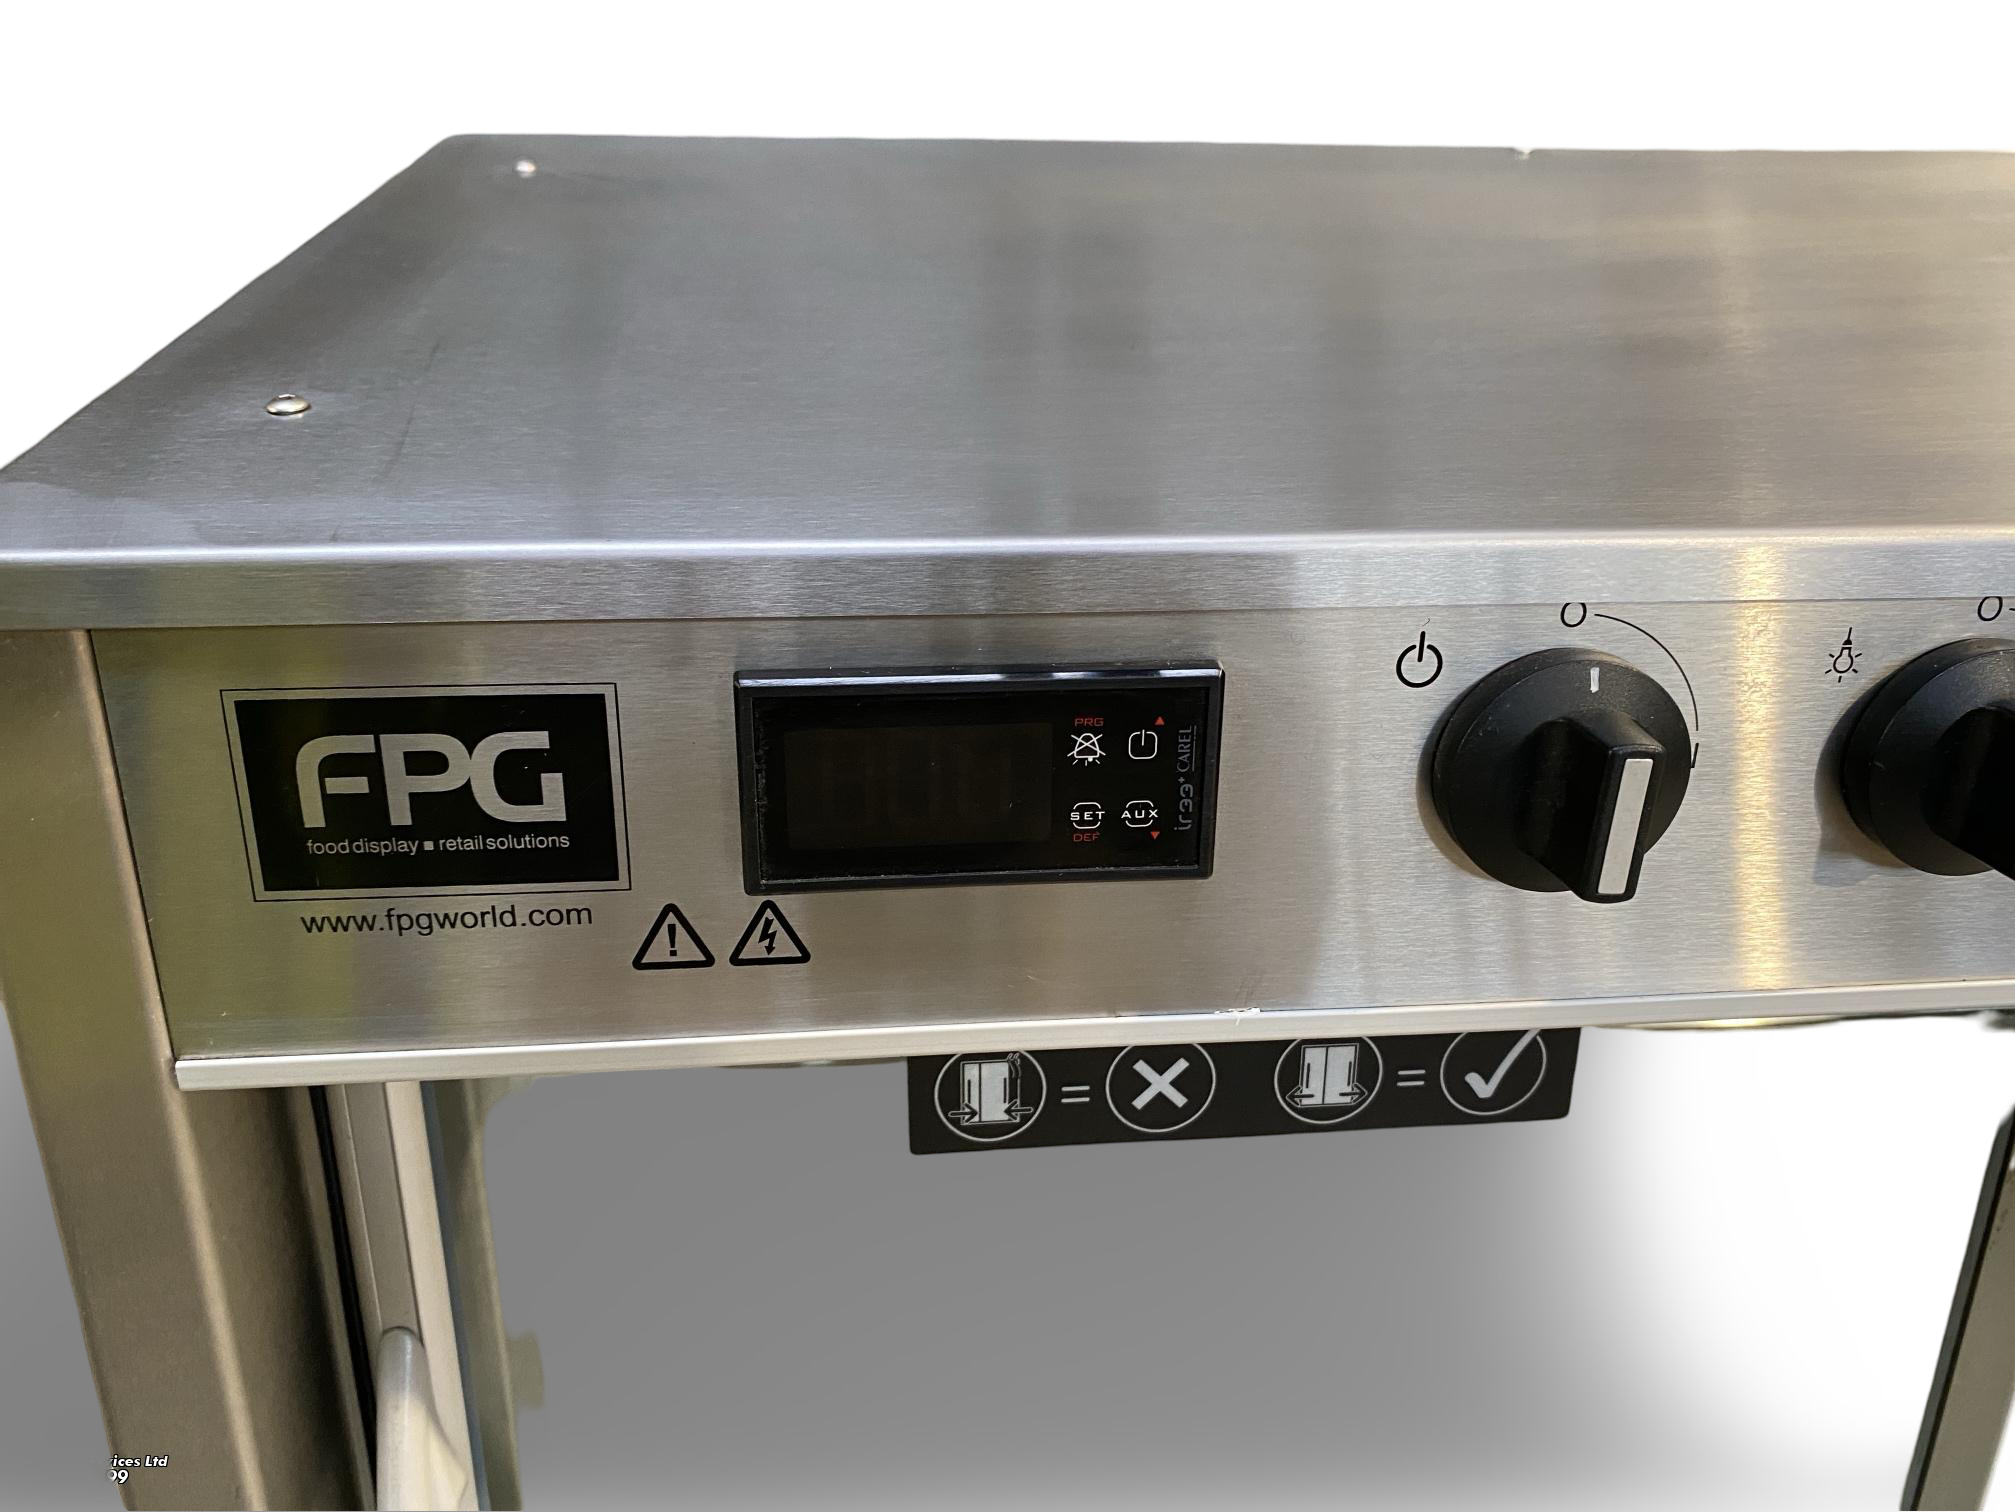 Thumbnail - FPG INLINE IN-3C12 Refrigerated Display Cabinet